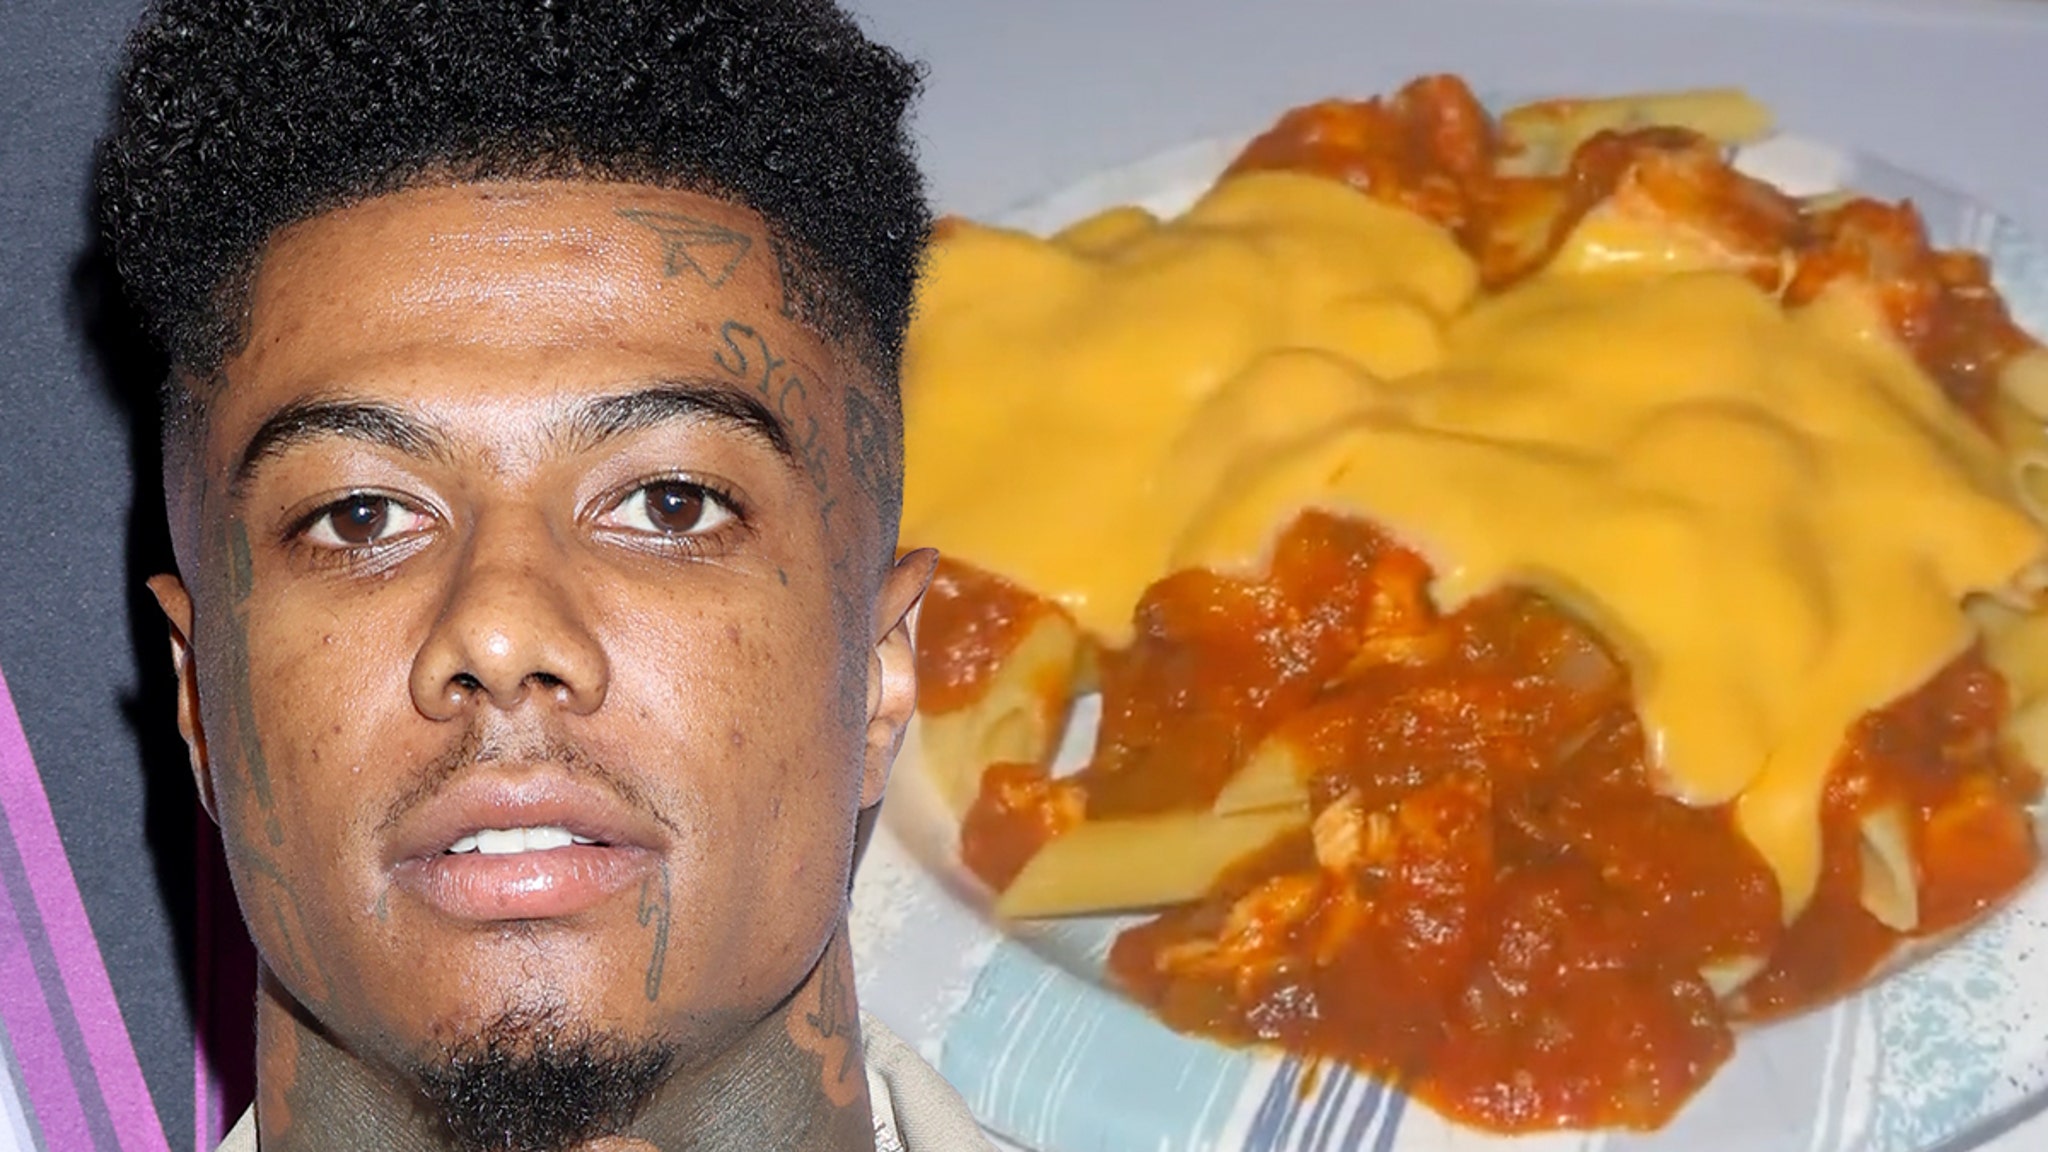 Blueface Roasted For Showing Off Fiancee’s Home Cooking